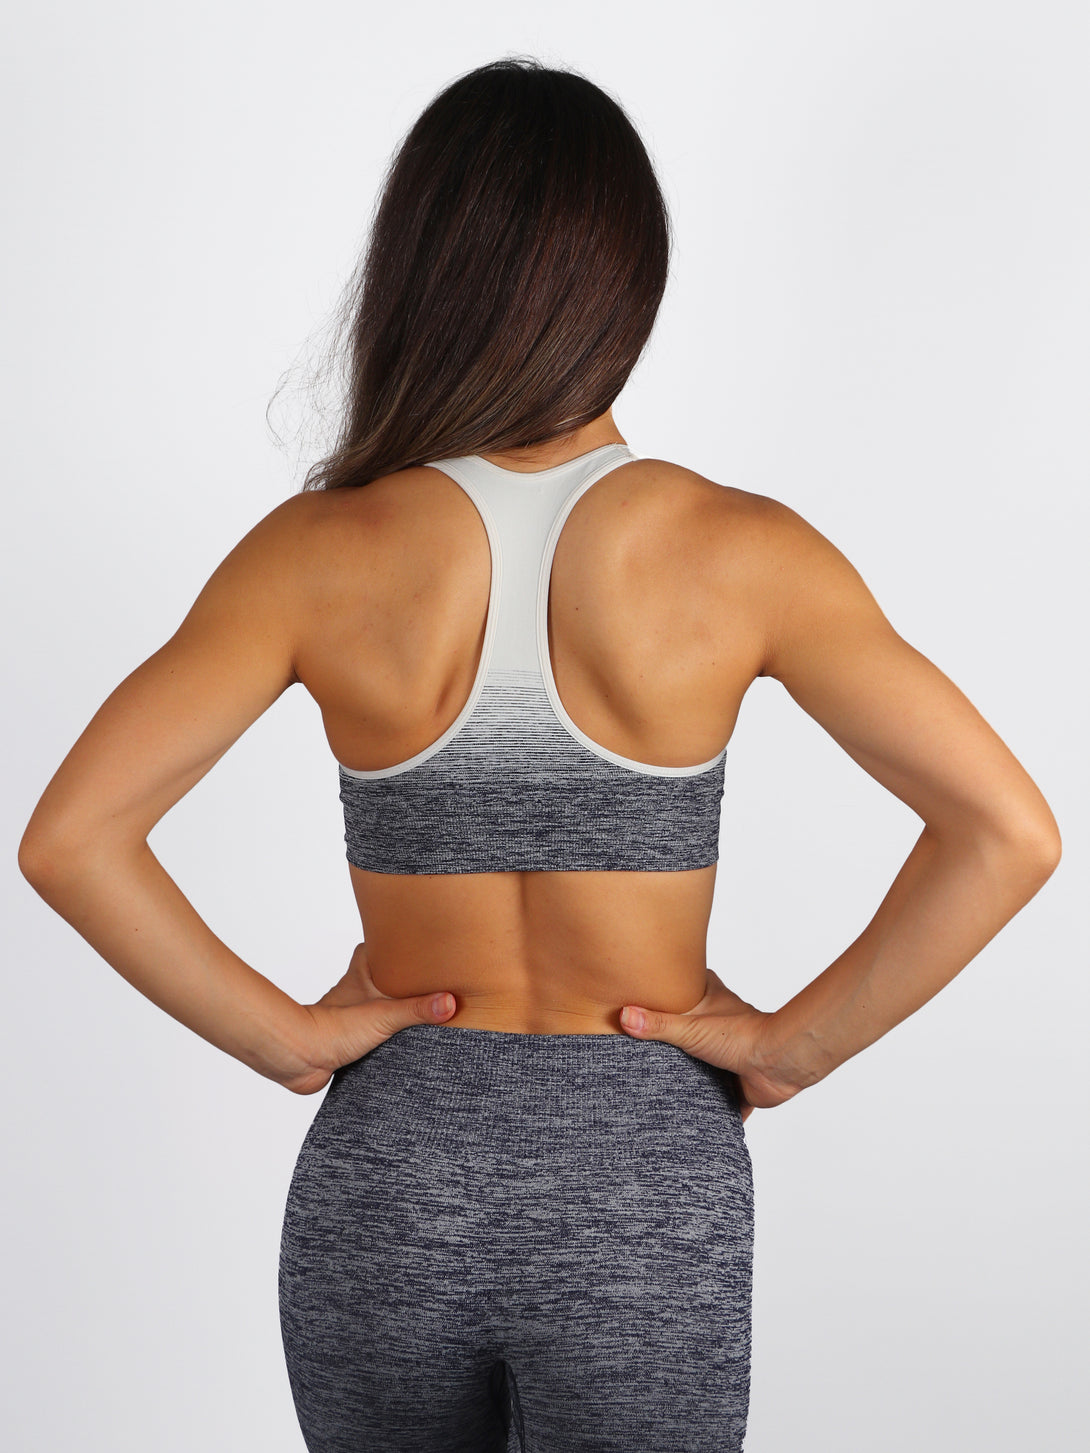 A woman wearing Peacoat color Seamless Ombre Medium Support Sports Bra